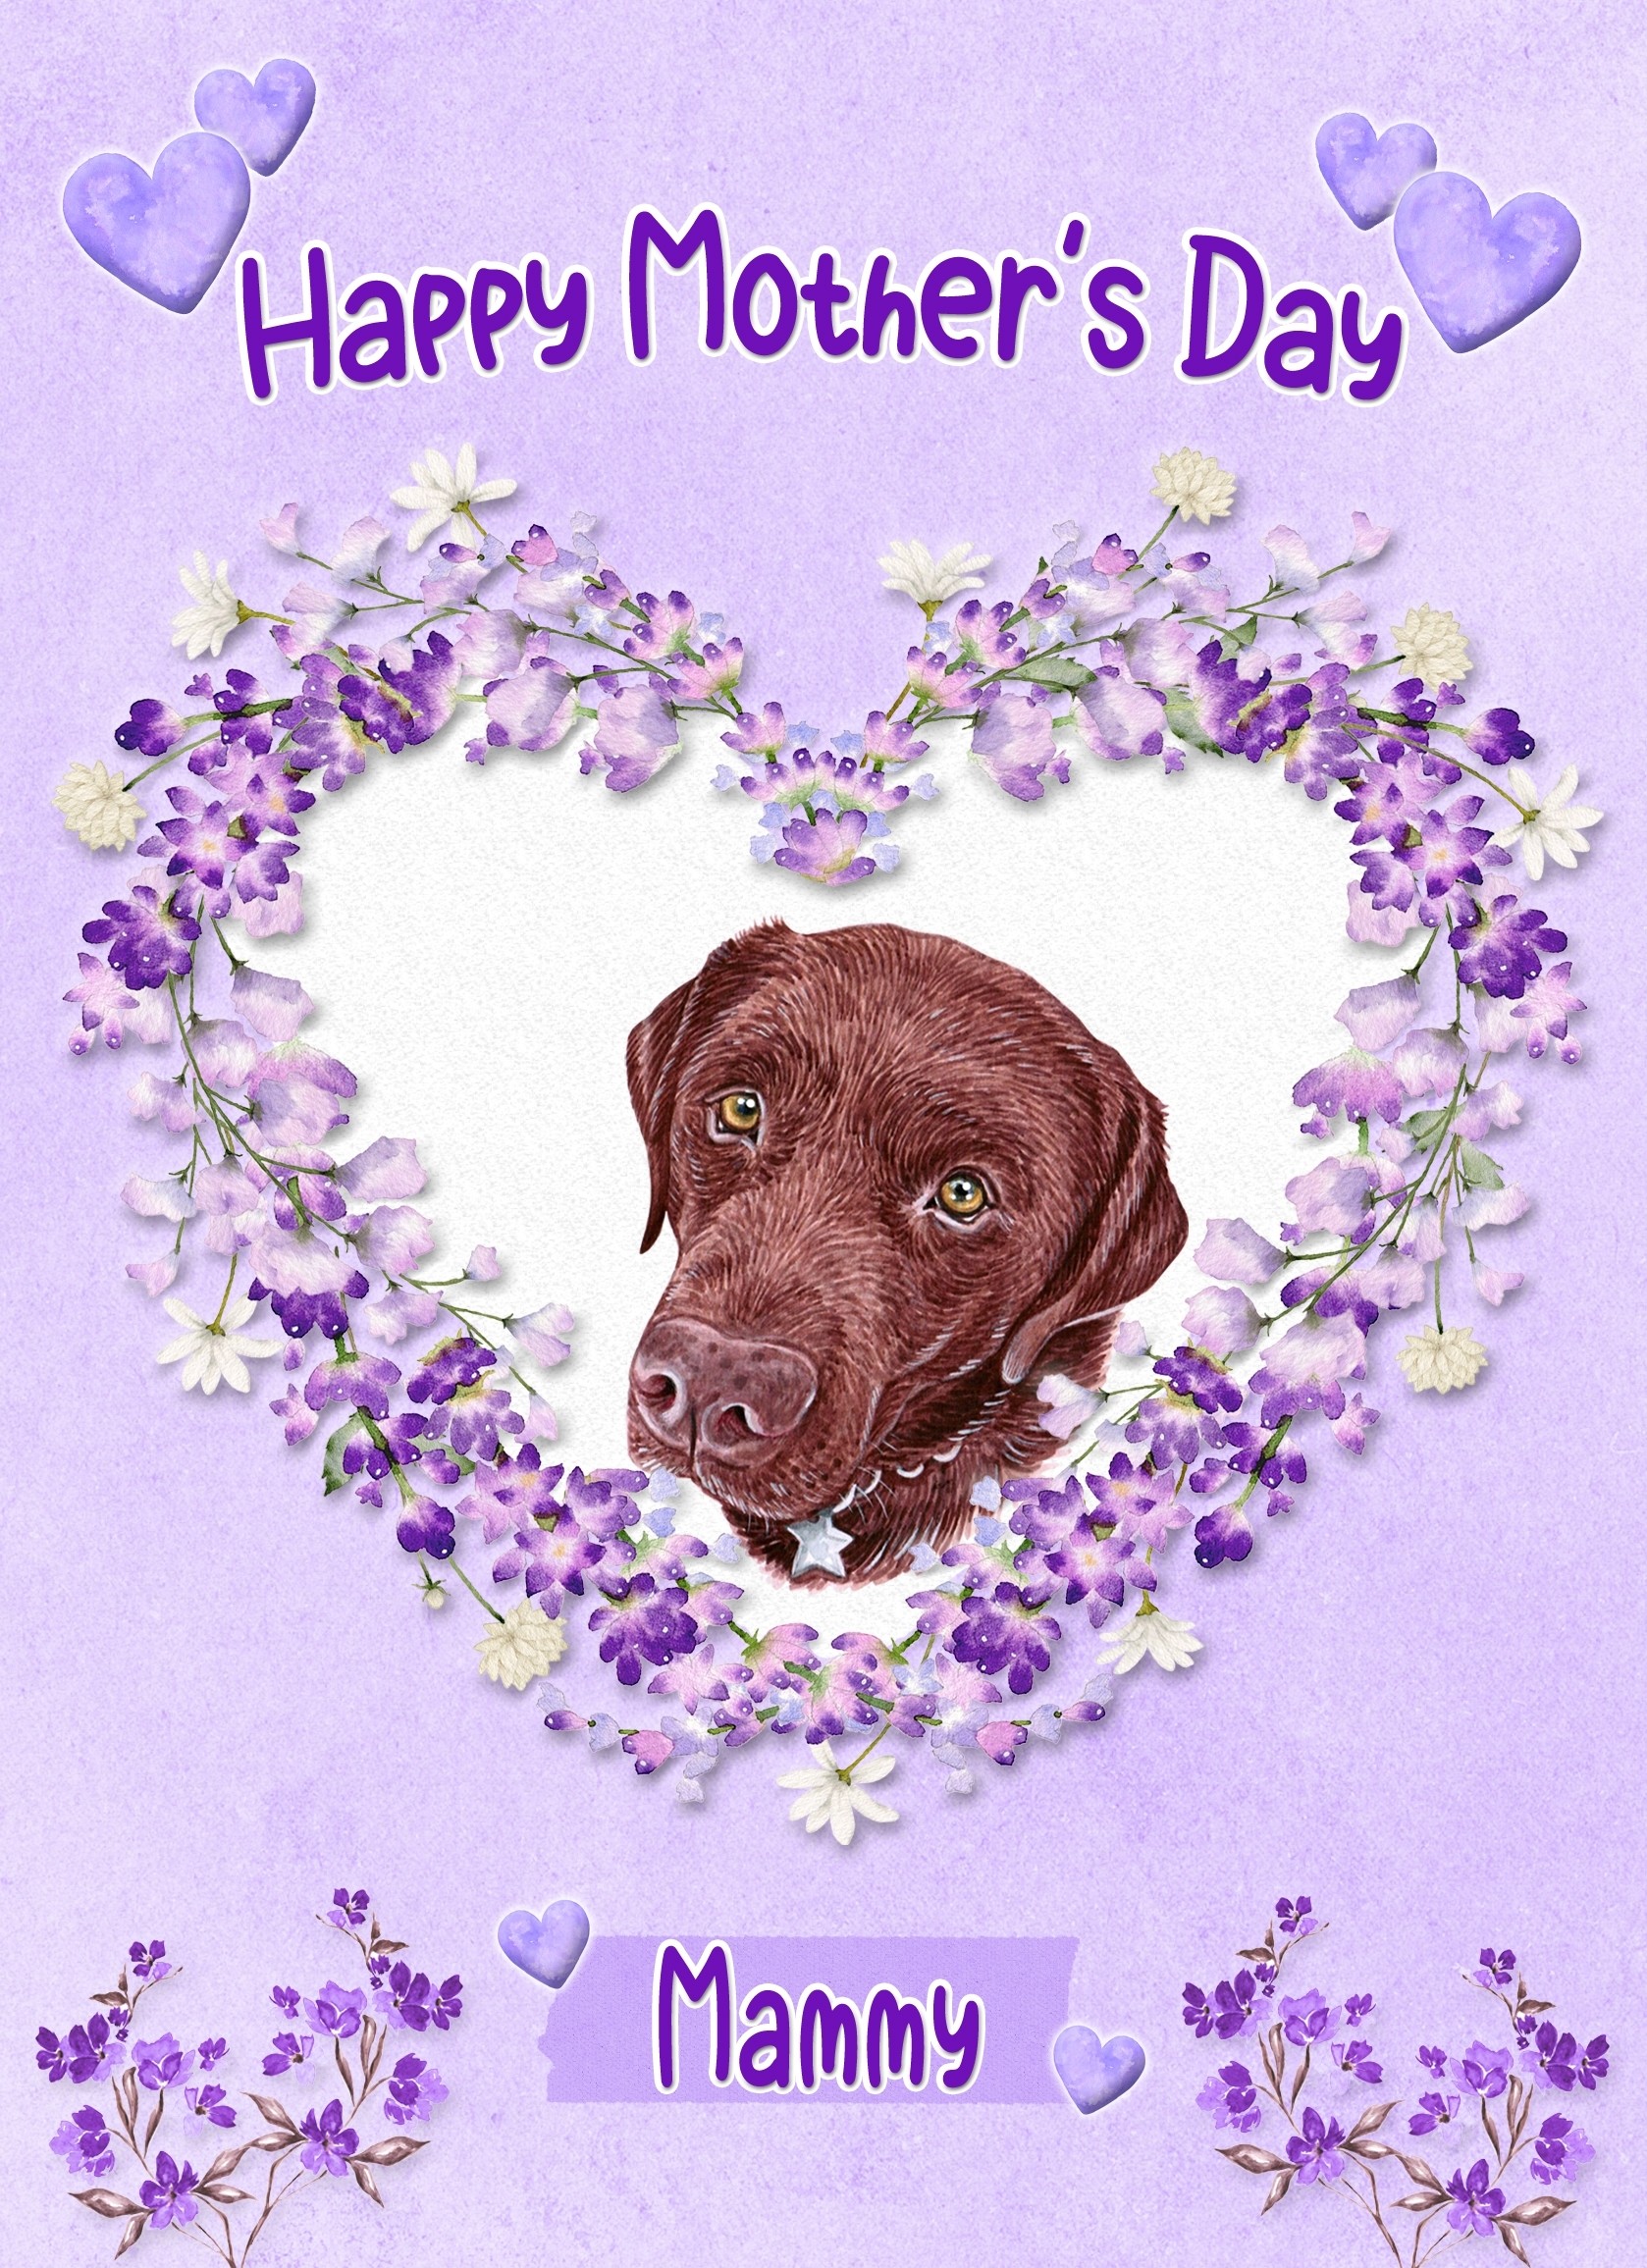 Chocolate Labrador Dog Mothers Day Card (Happy Mothers, Mammy)